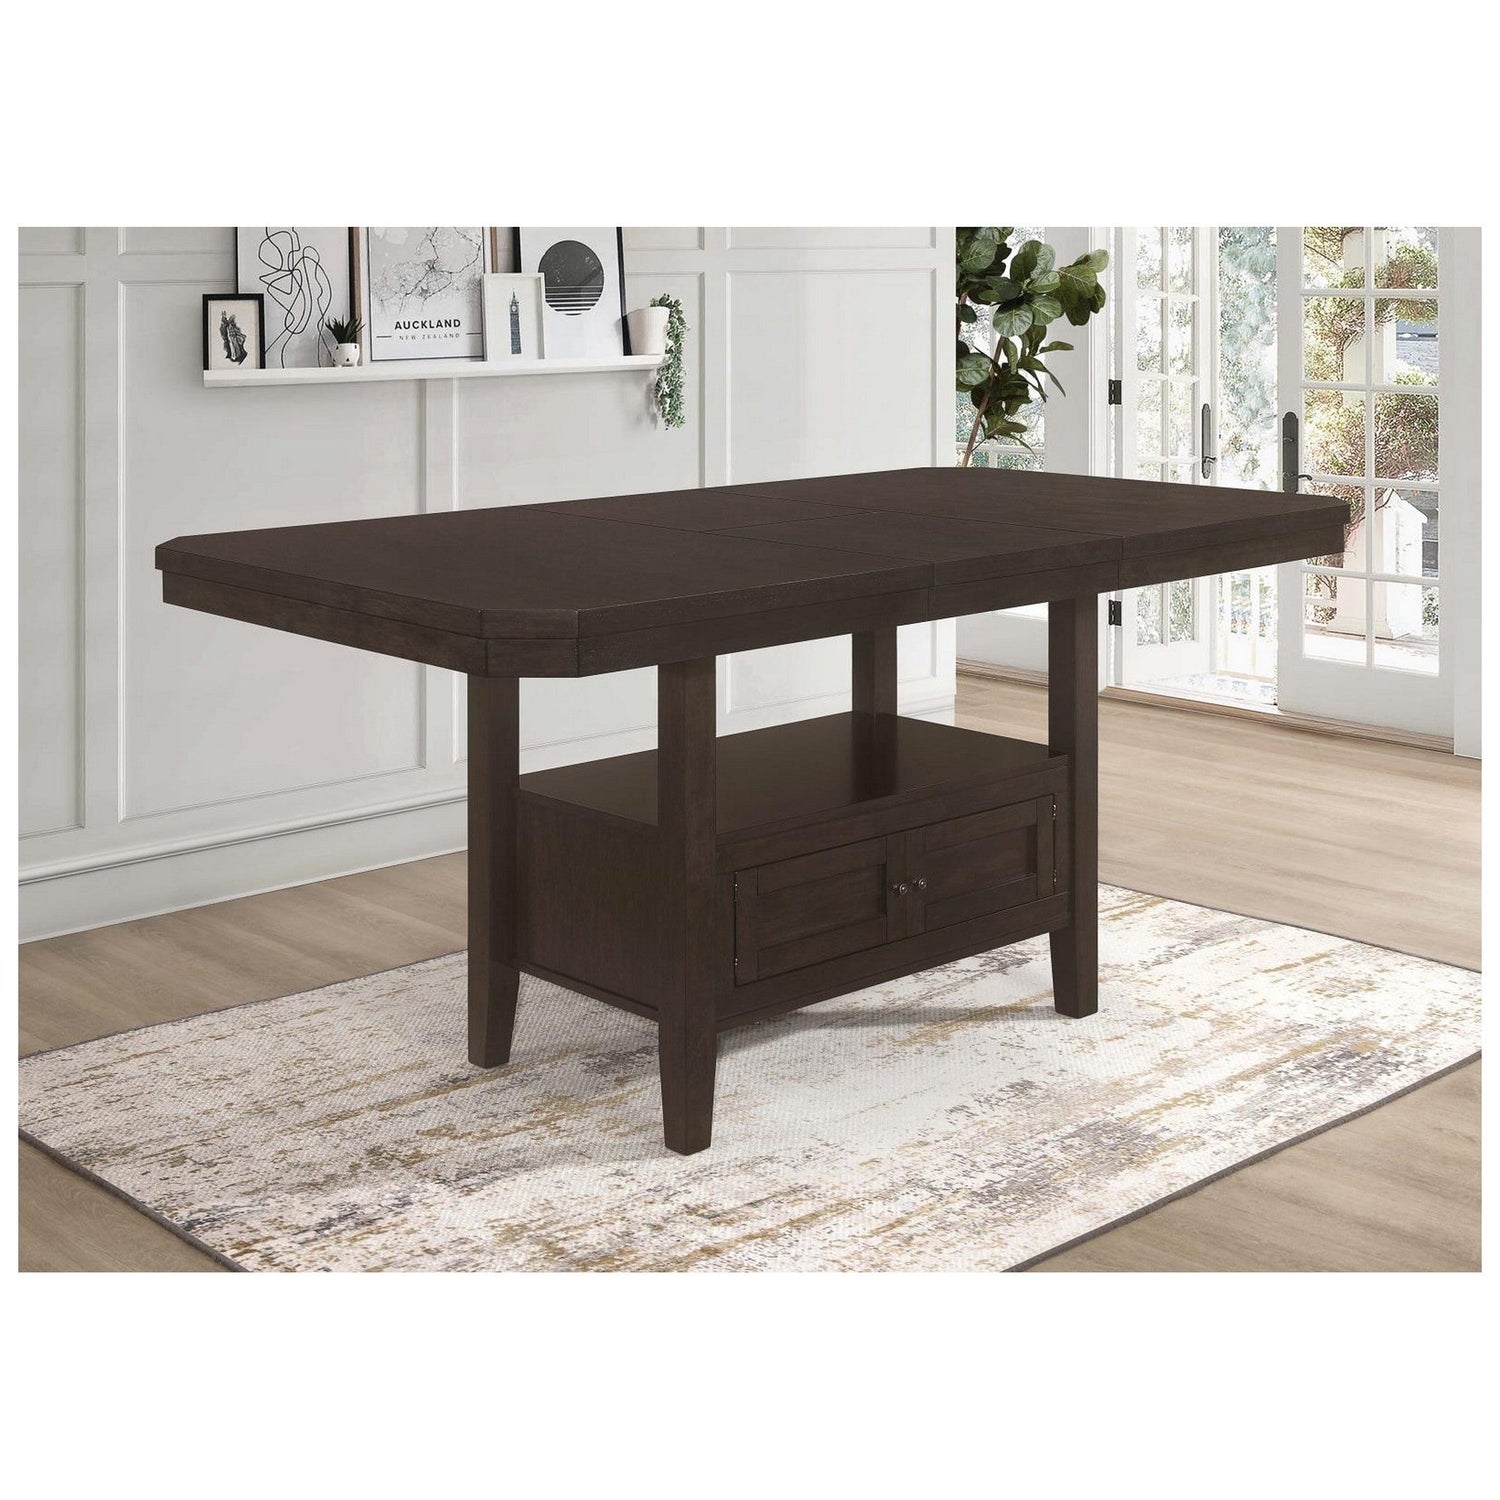 Prentiss Extendable Rectangular Counter Height Table with Butterfly Leaf Cappuccino 193108